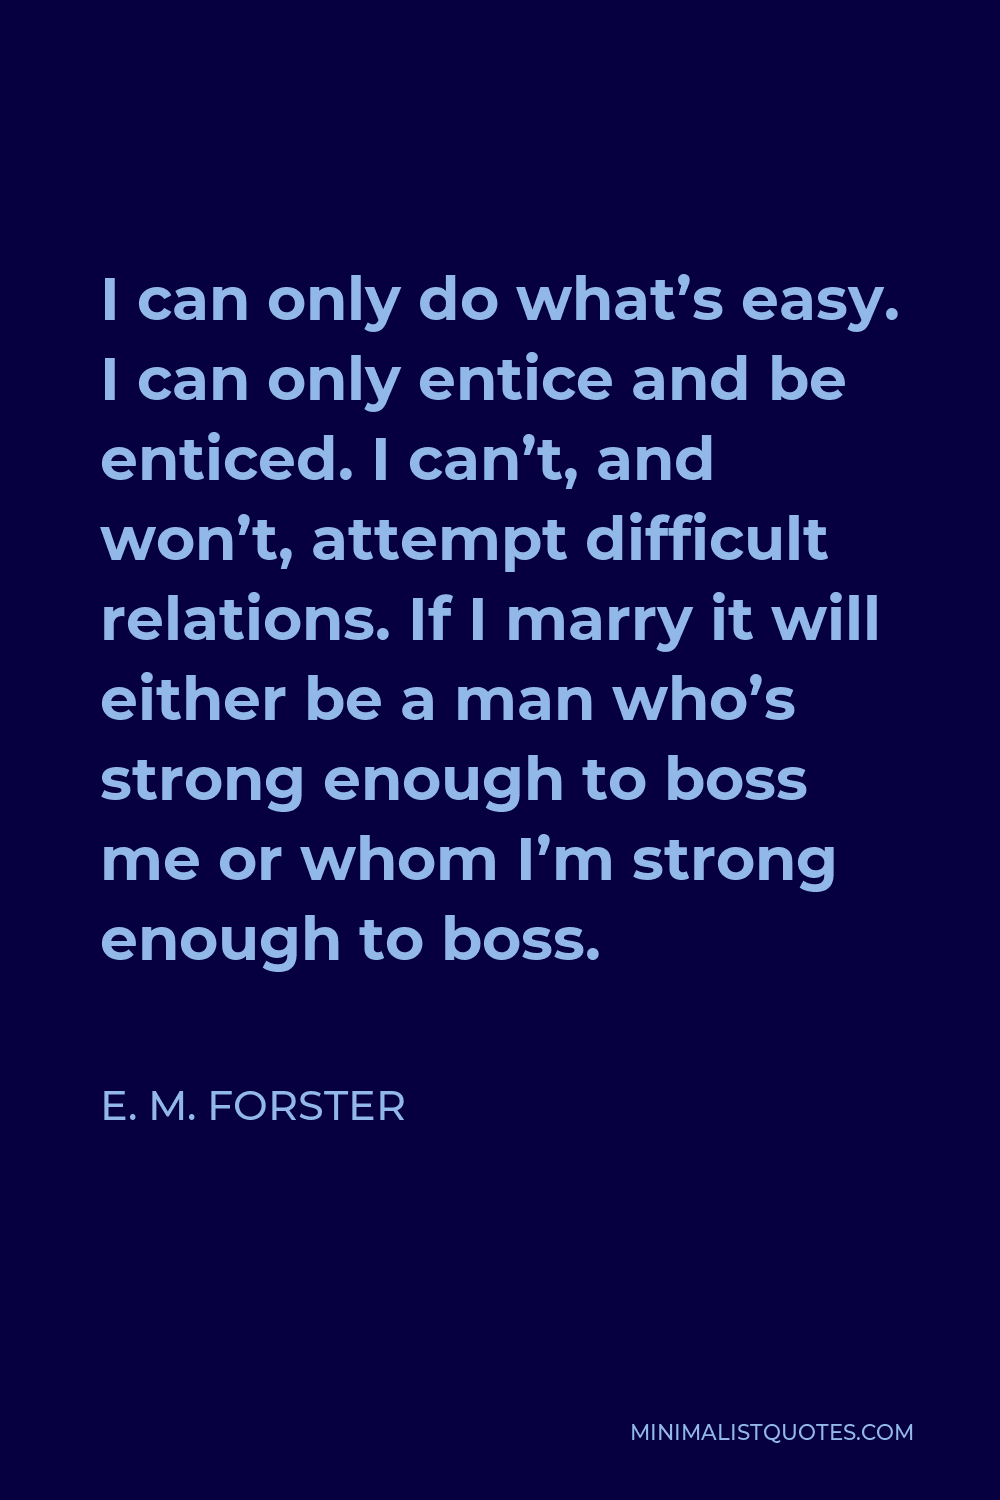 E. M. Forster Quote - I can only do what’s easy. I can only entice and be enticed. I can’t, and won’t, attempt difficult relations. If I marry it will either be a man who’s strong enough to boss me or whom I’m strong enough to boss.